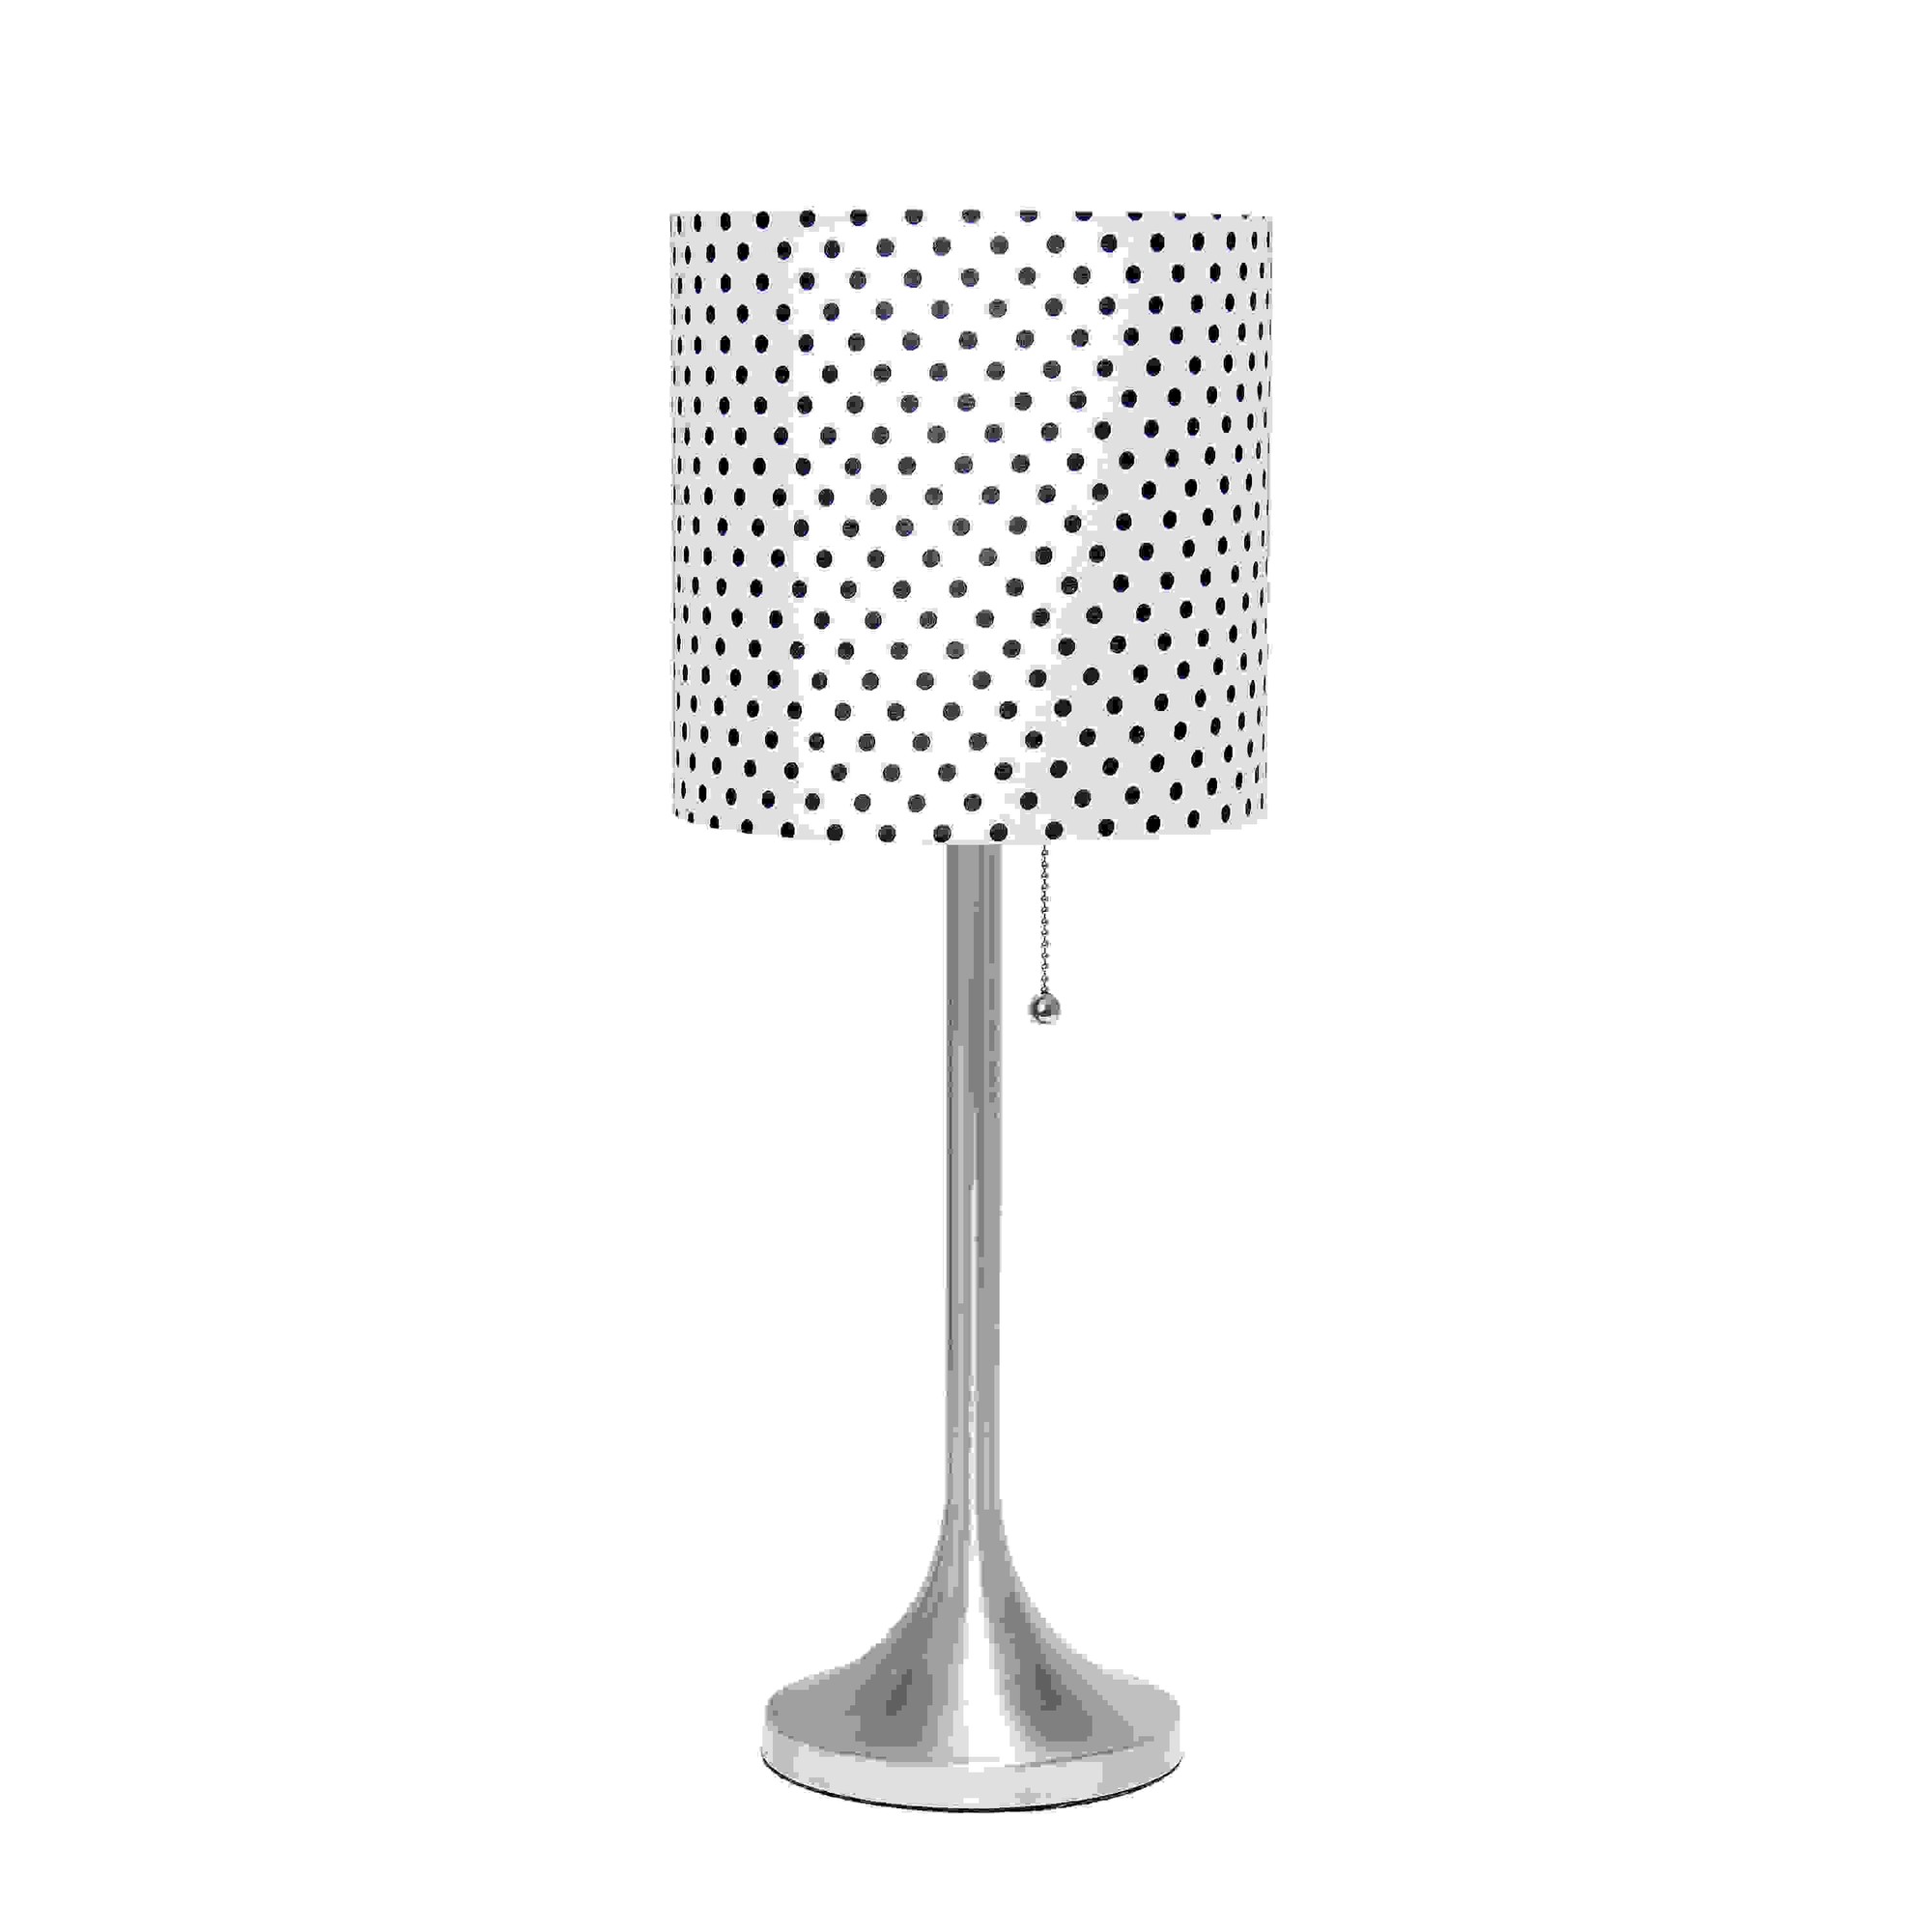 Simple Designs Brushed Nickel Tapered Table Lamp with Polka Dot Fabric Drum Shade